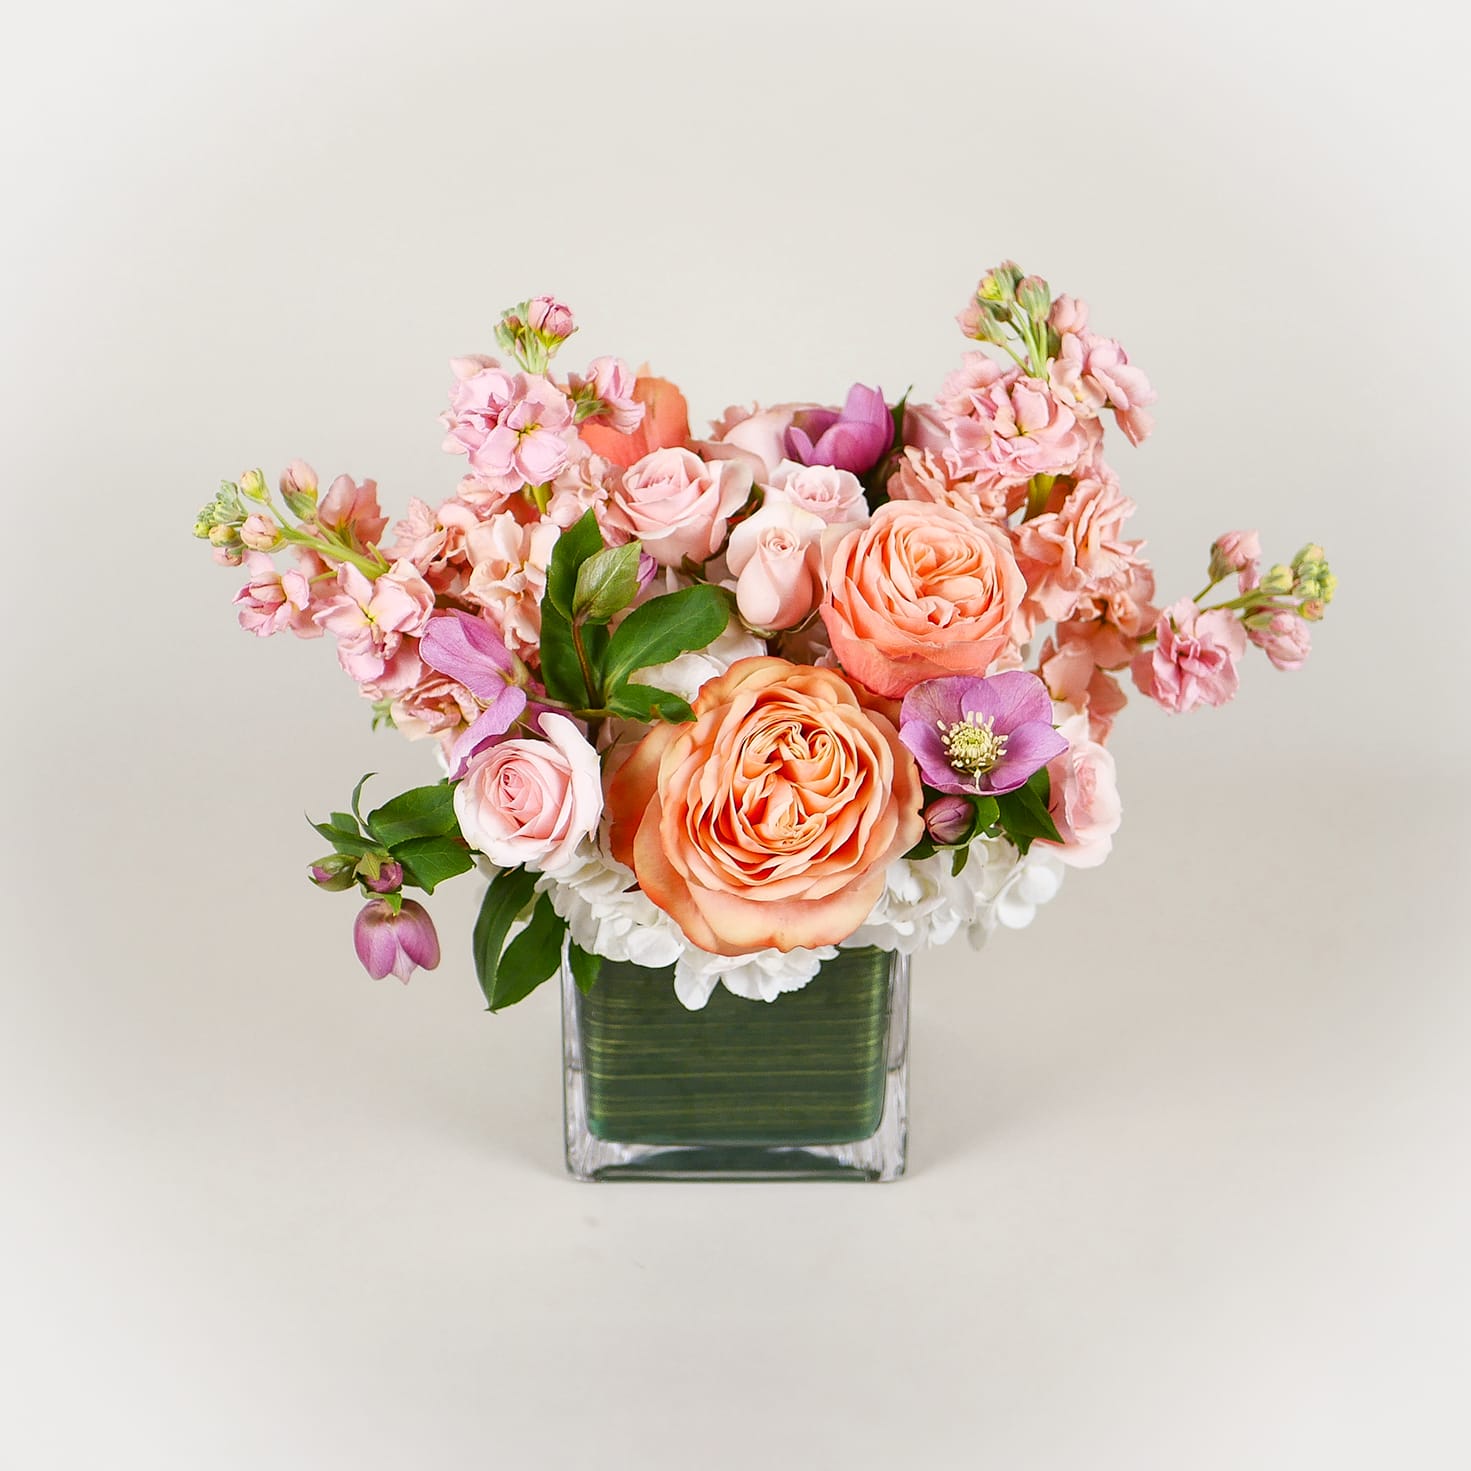 Princess Peach - This bright arrangement boasts white hydrangeas, peach roses, fragrant peach stock, and hellebores in a 5&quot; leaf-lined glass square. Full and lush, it's the perfect captivating gift and one of our most popular sellers!